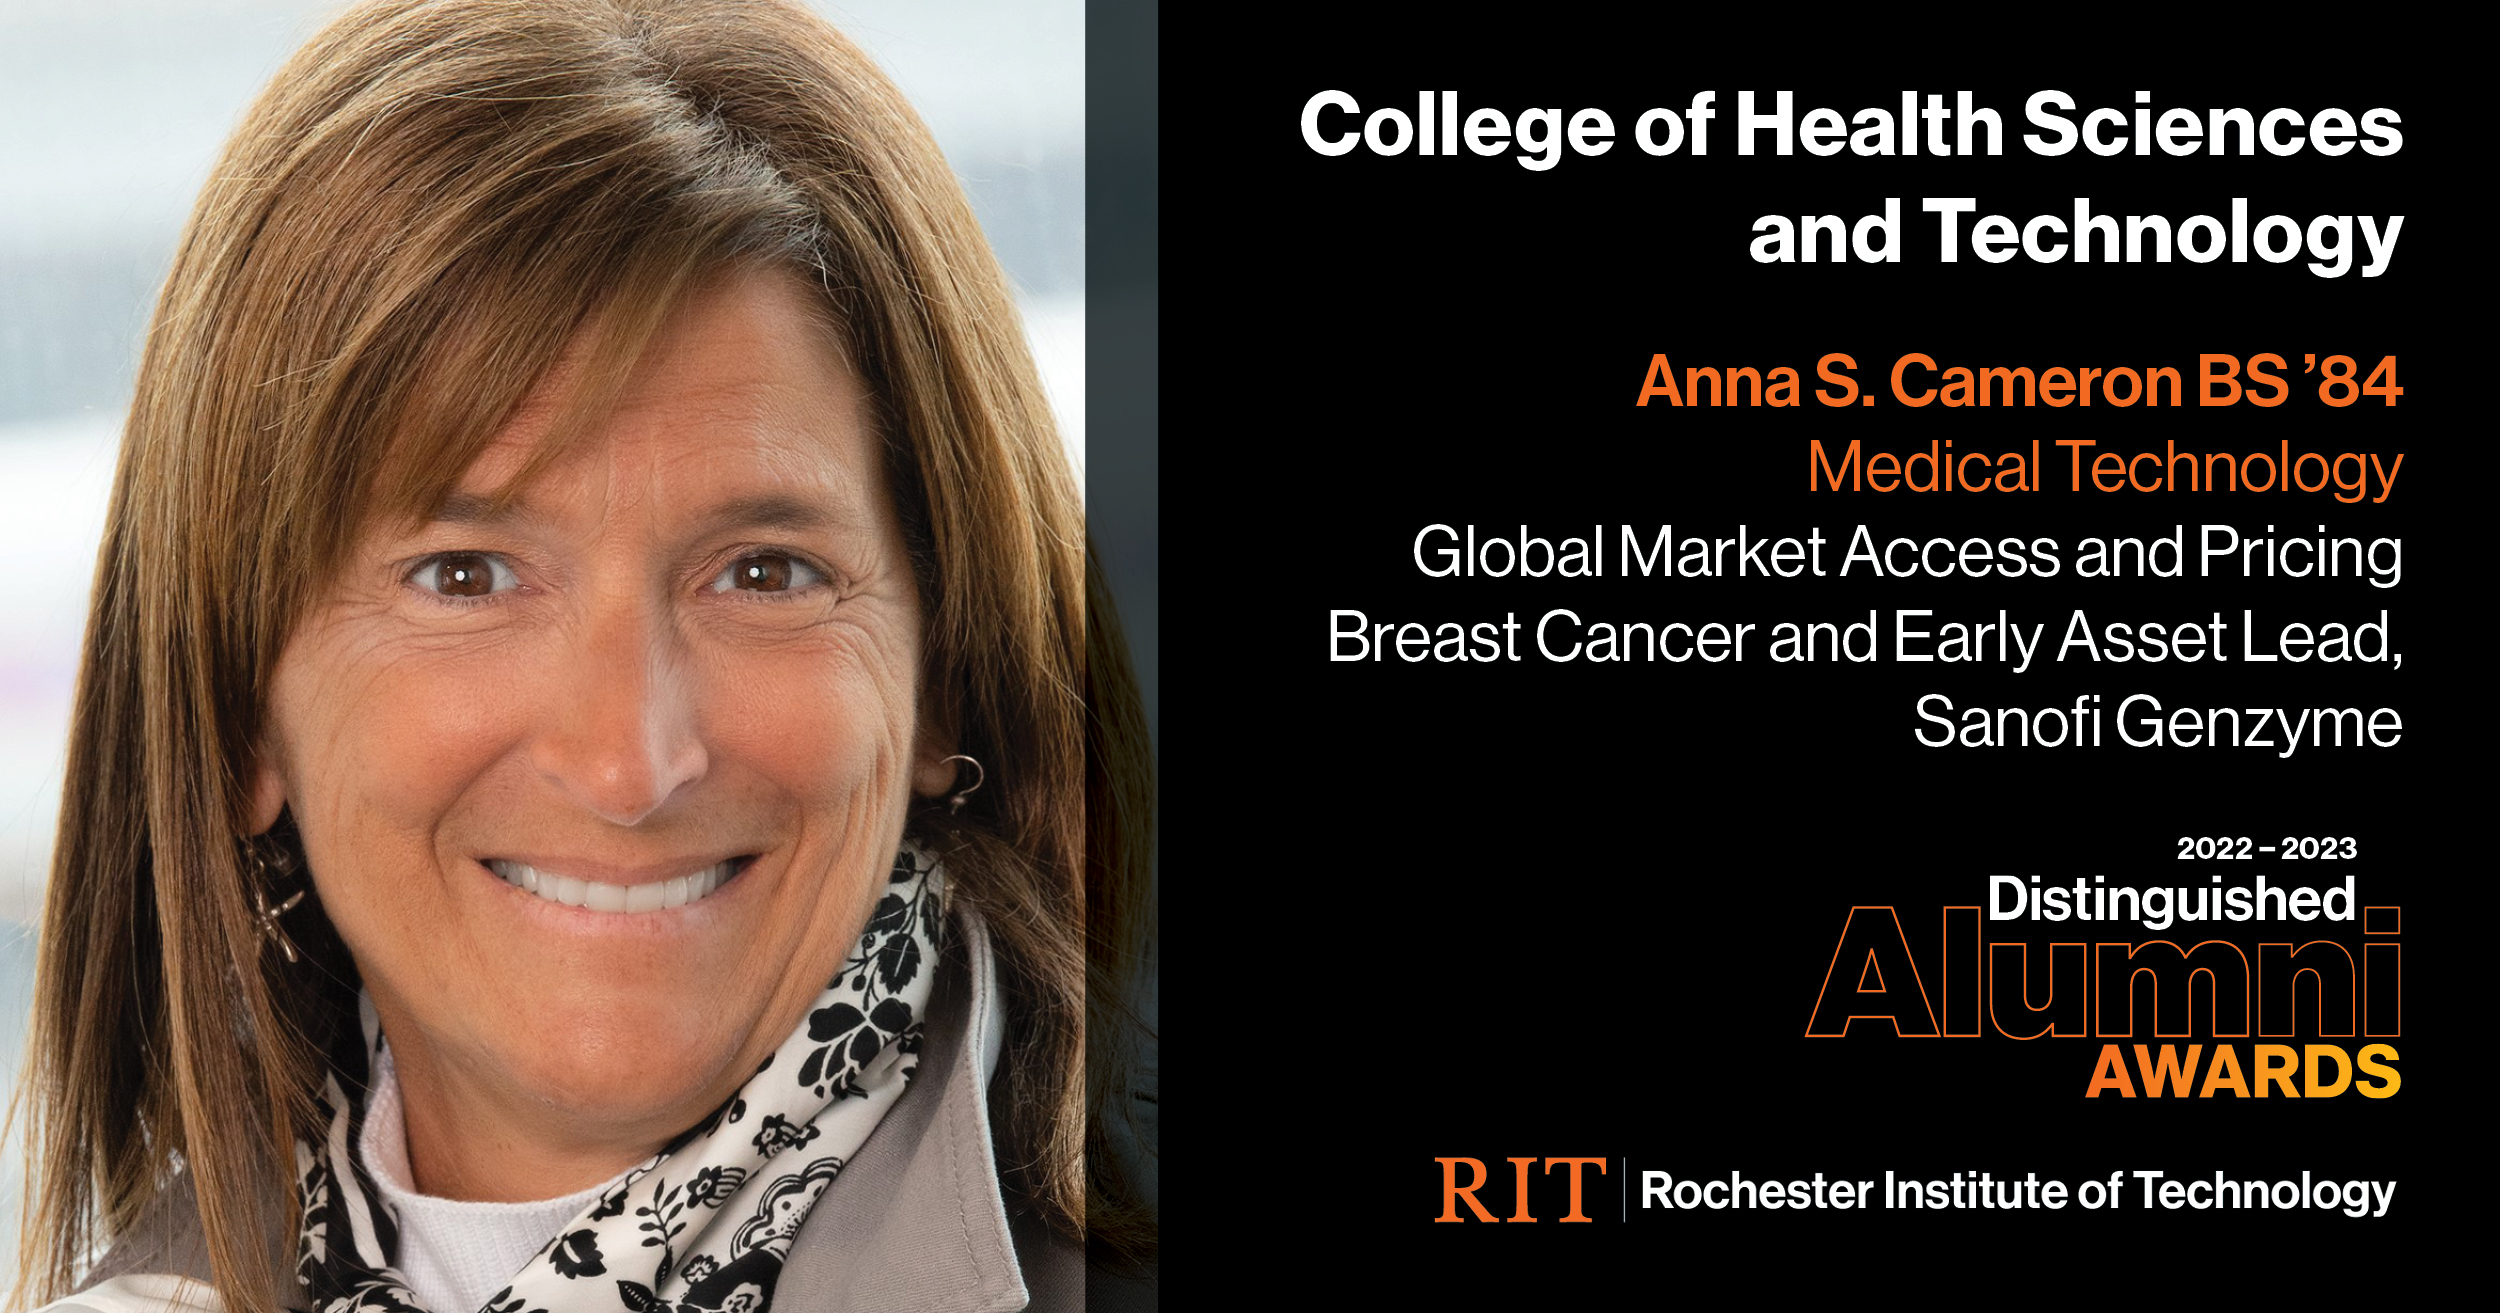 Image on Left: Head shot Anna S. Cameron Text on RIght: College of Health Sciences and Technology Anna S. Cameron BS'84 Global Market Access and Pricing Breast Cancer and Early Asset Lead, Sanofi Genzyme 2022-2023 Alumni Awards RIT | Rochester Institute of Technology